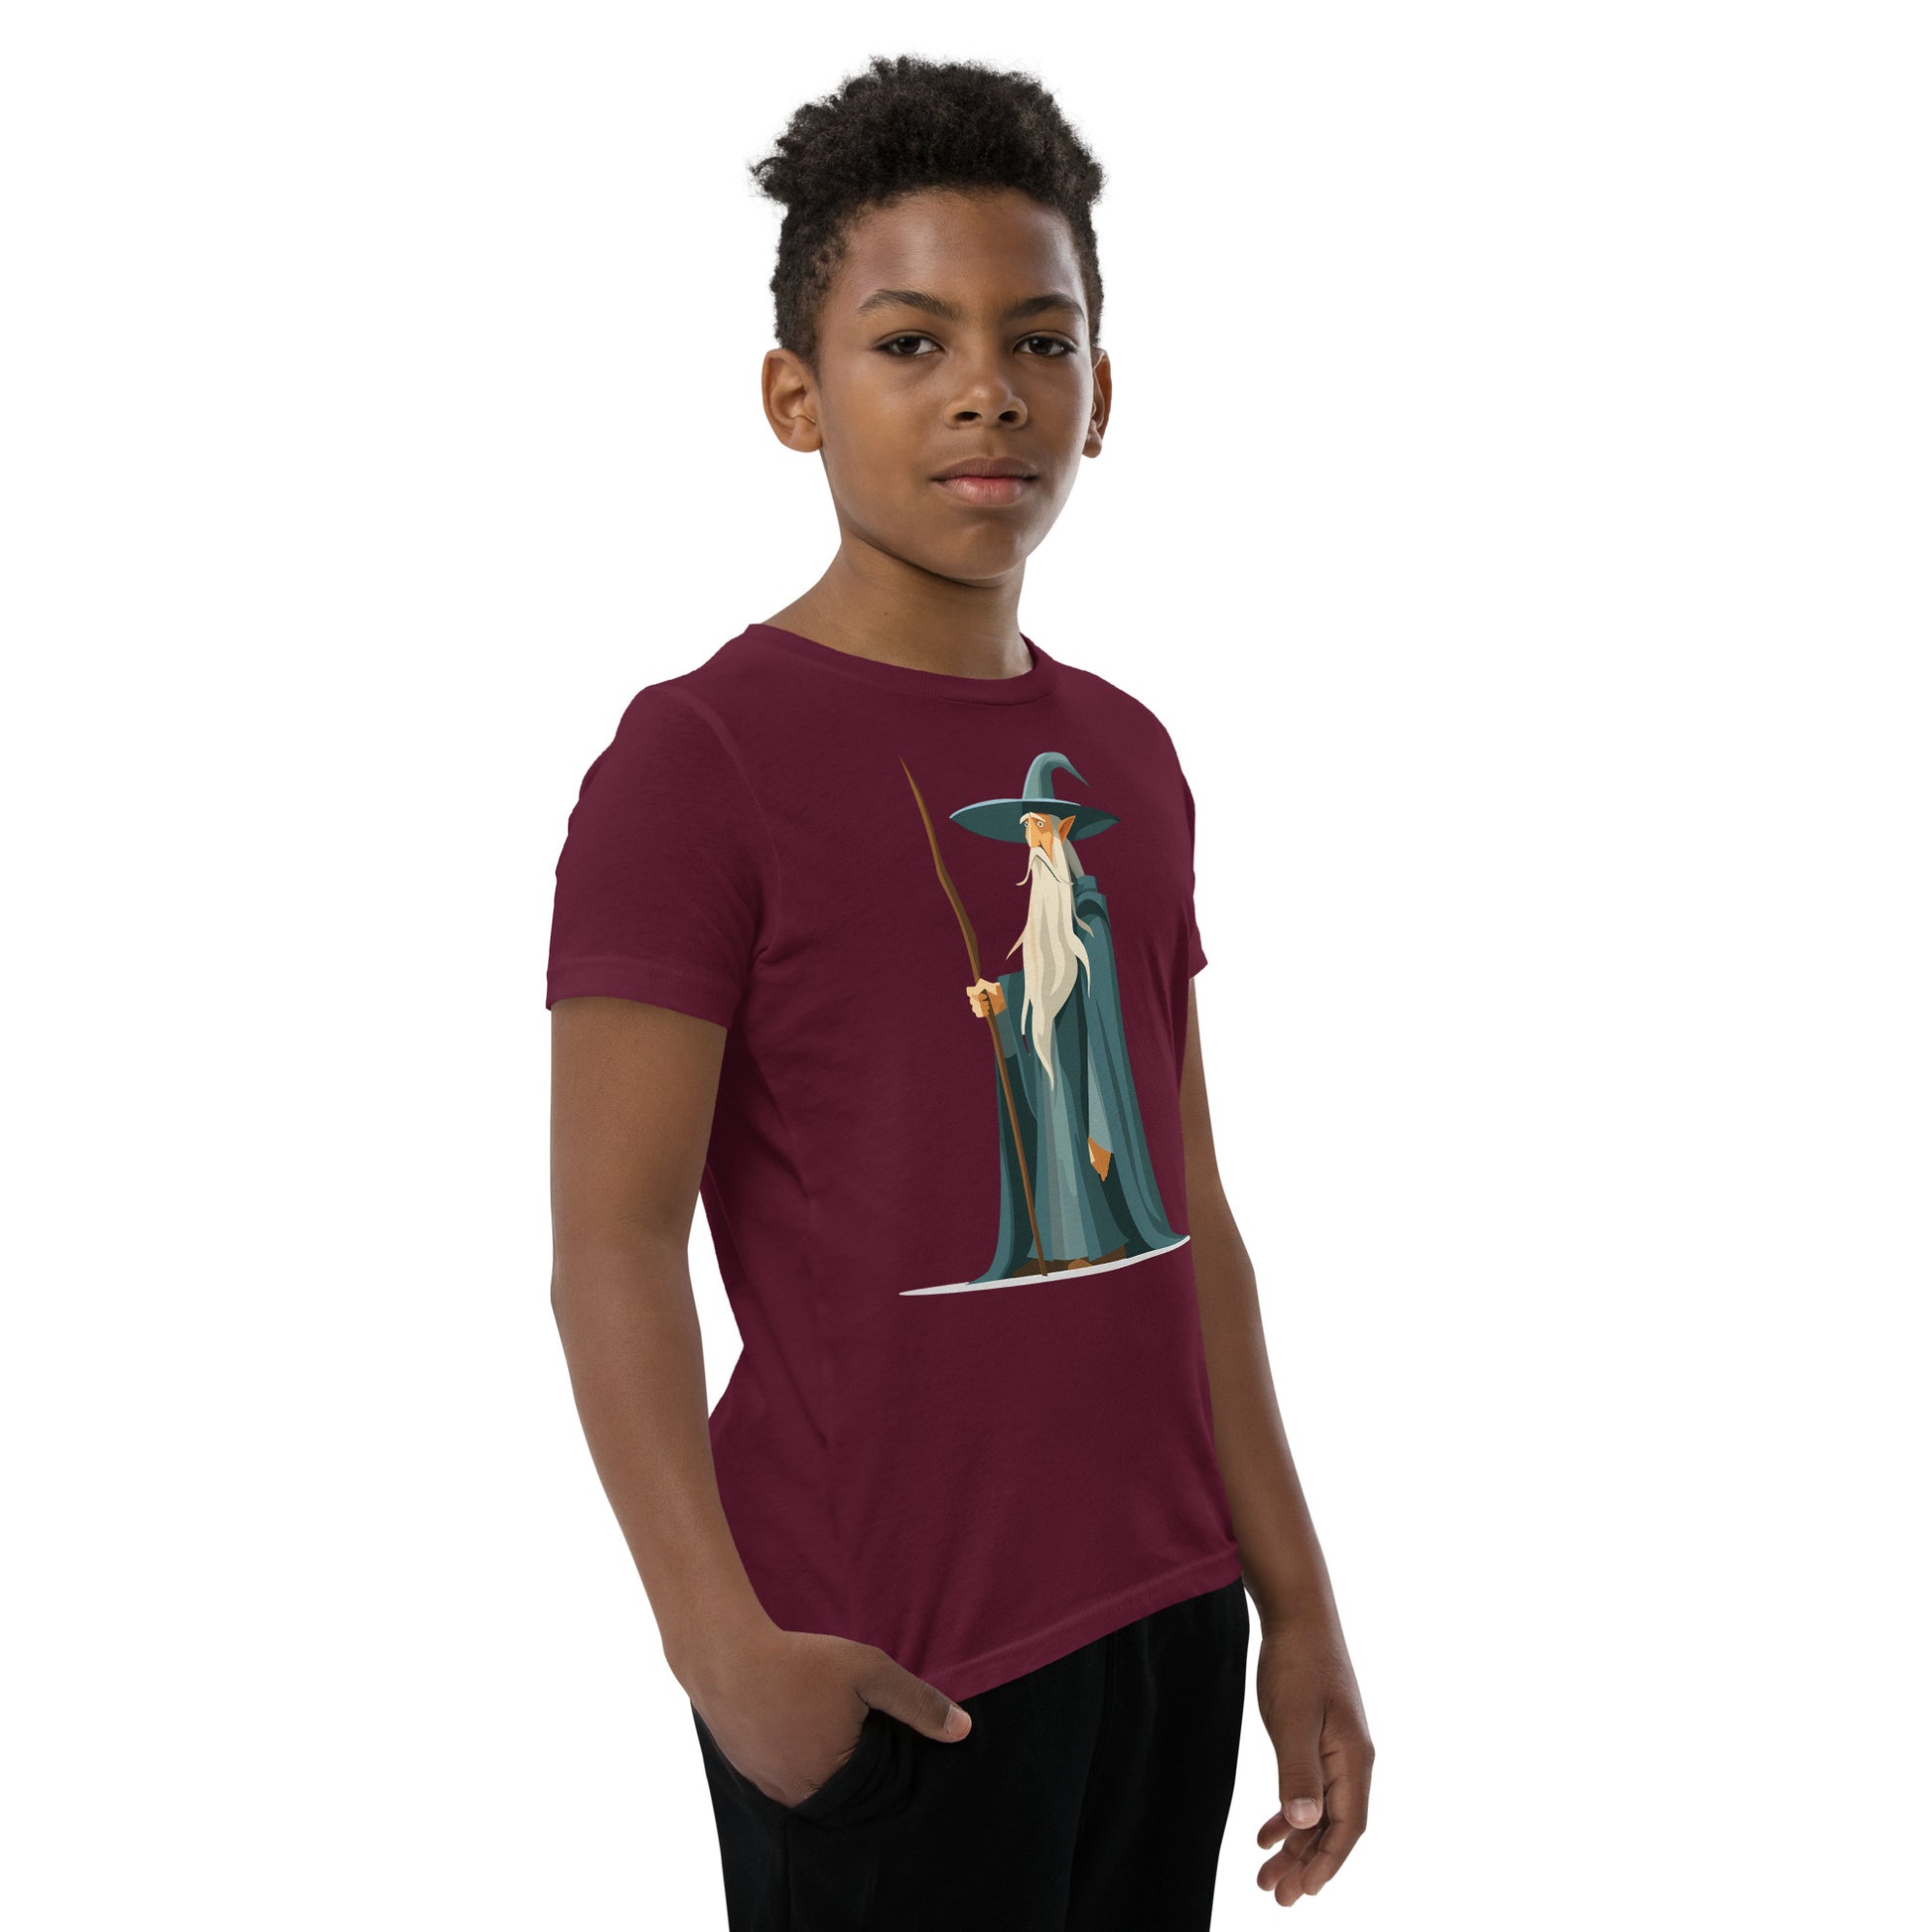 Boy with a maroon T-shirt with a picture of a magician